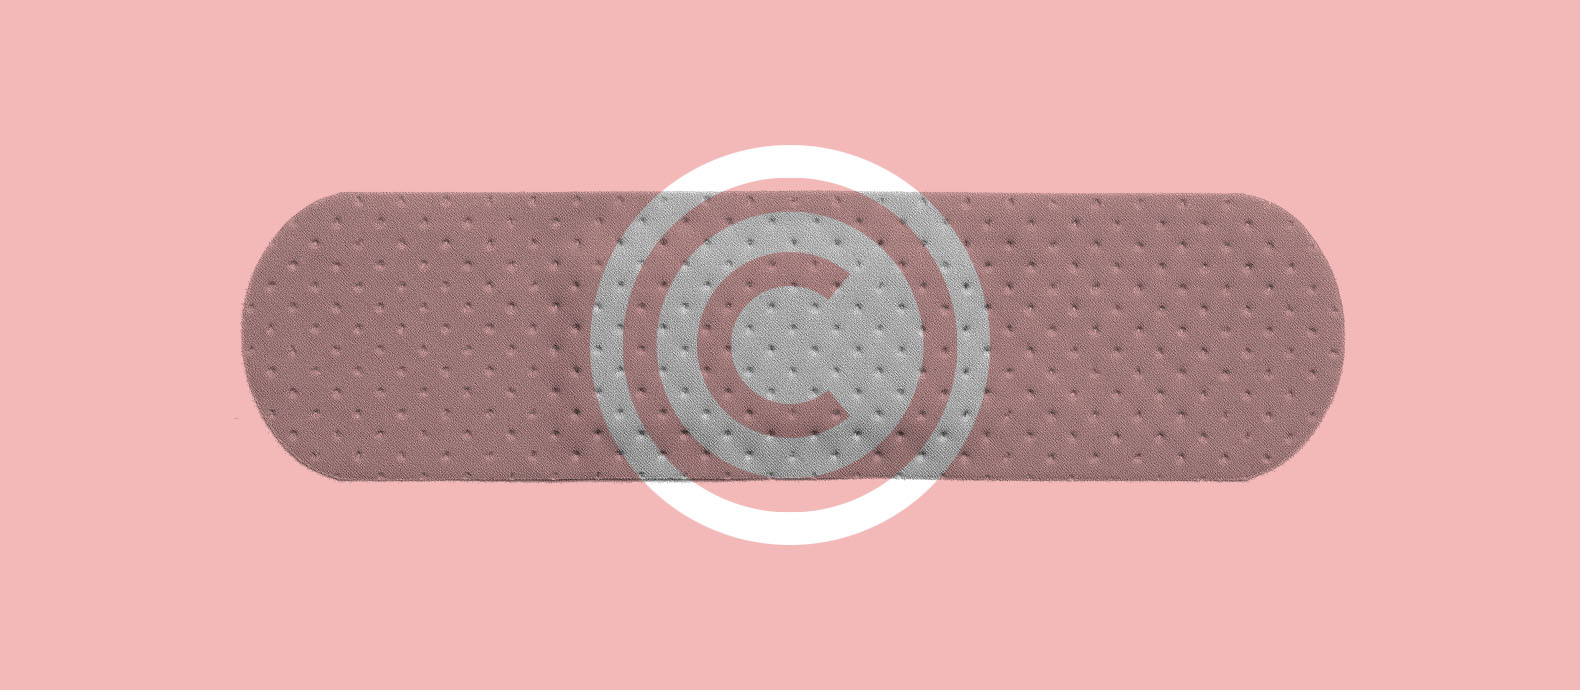 Copyright infringement damages: how and when to take legal action